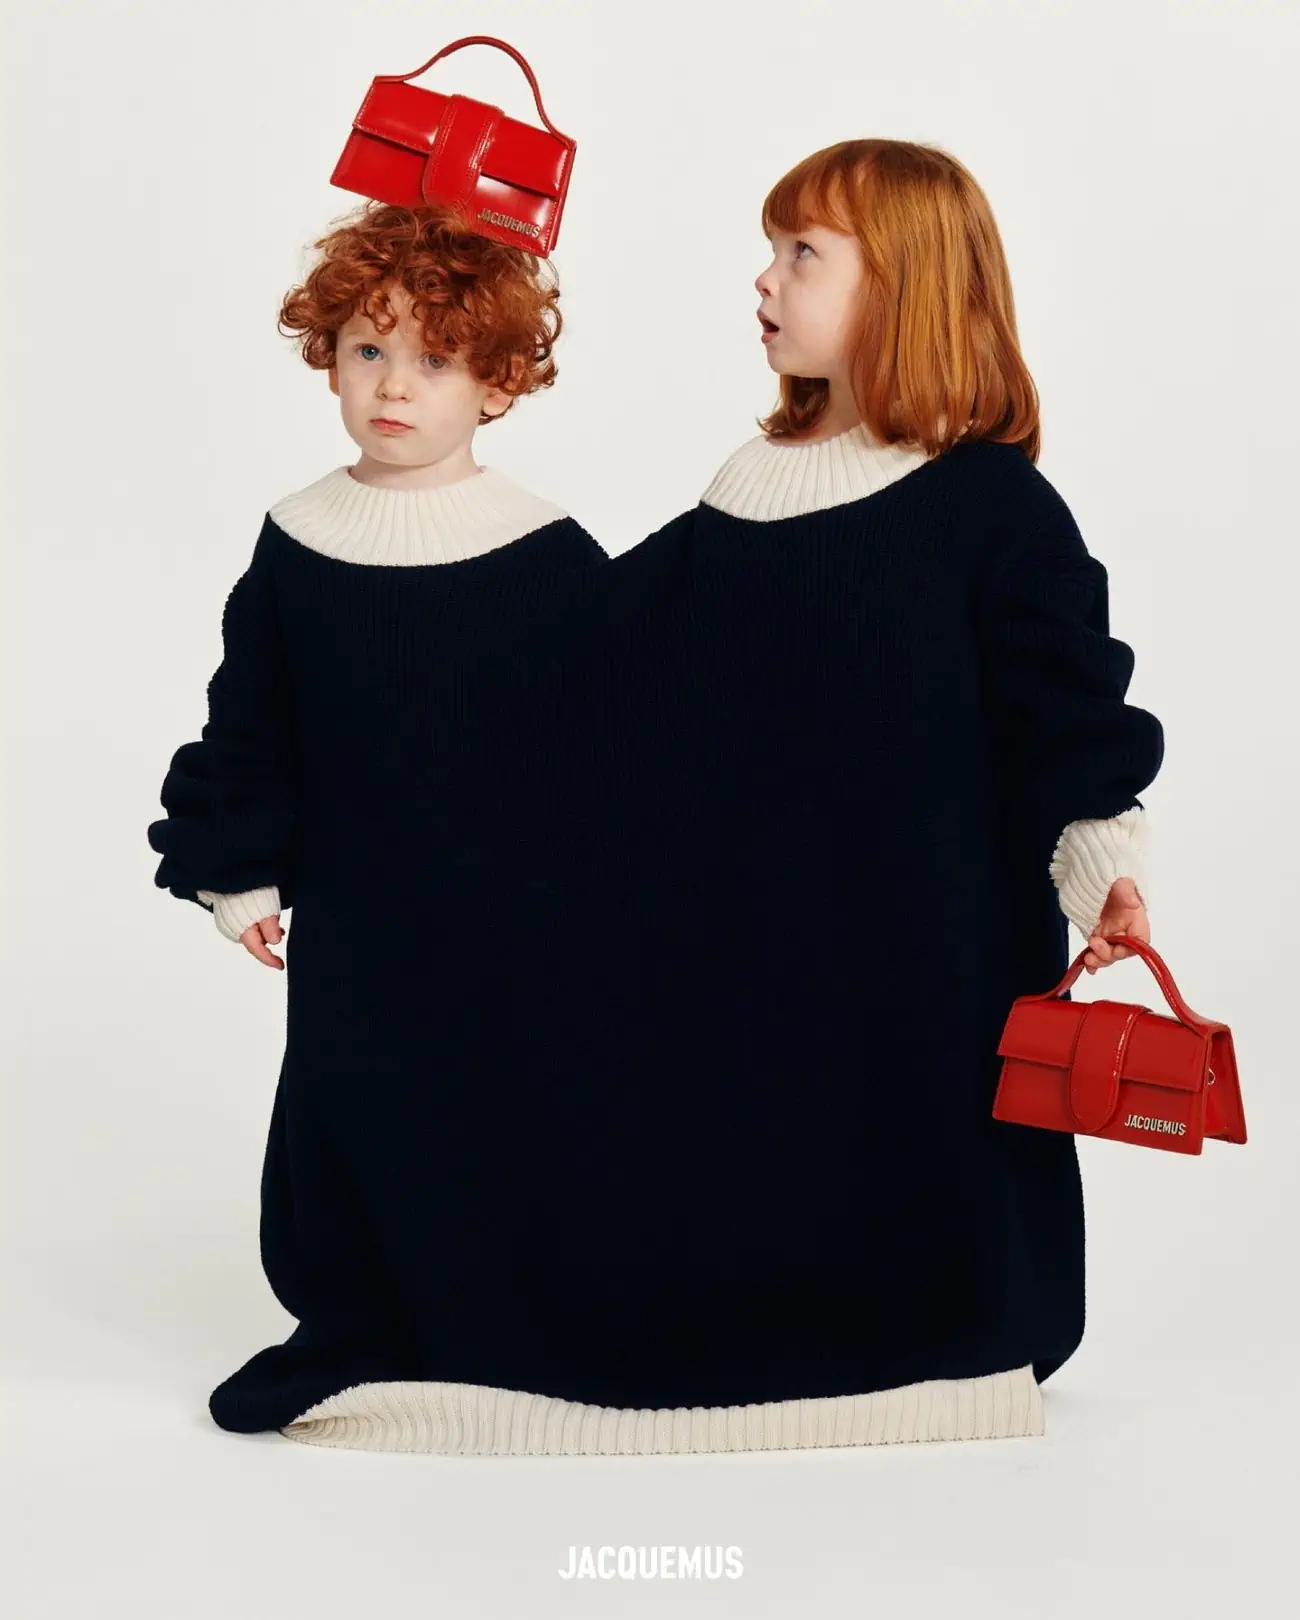 Jacquemus debuts charming ''MINI ME'', its first kids collection